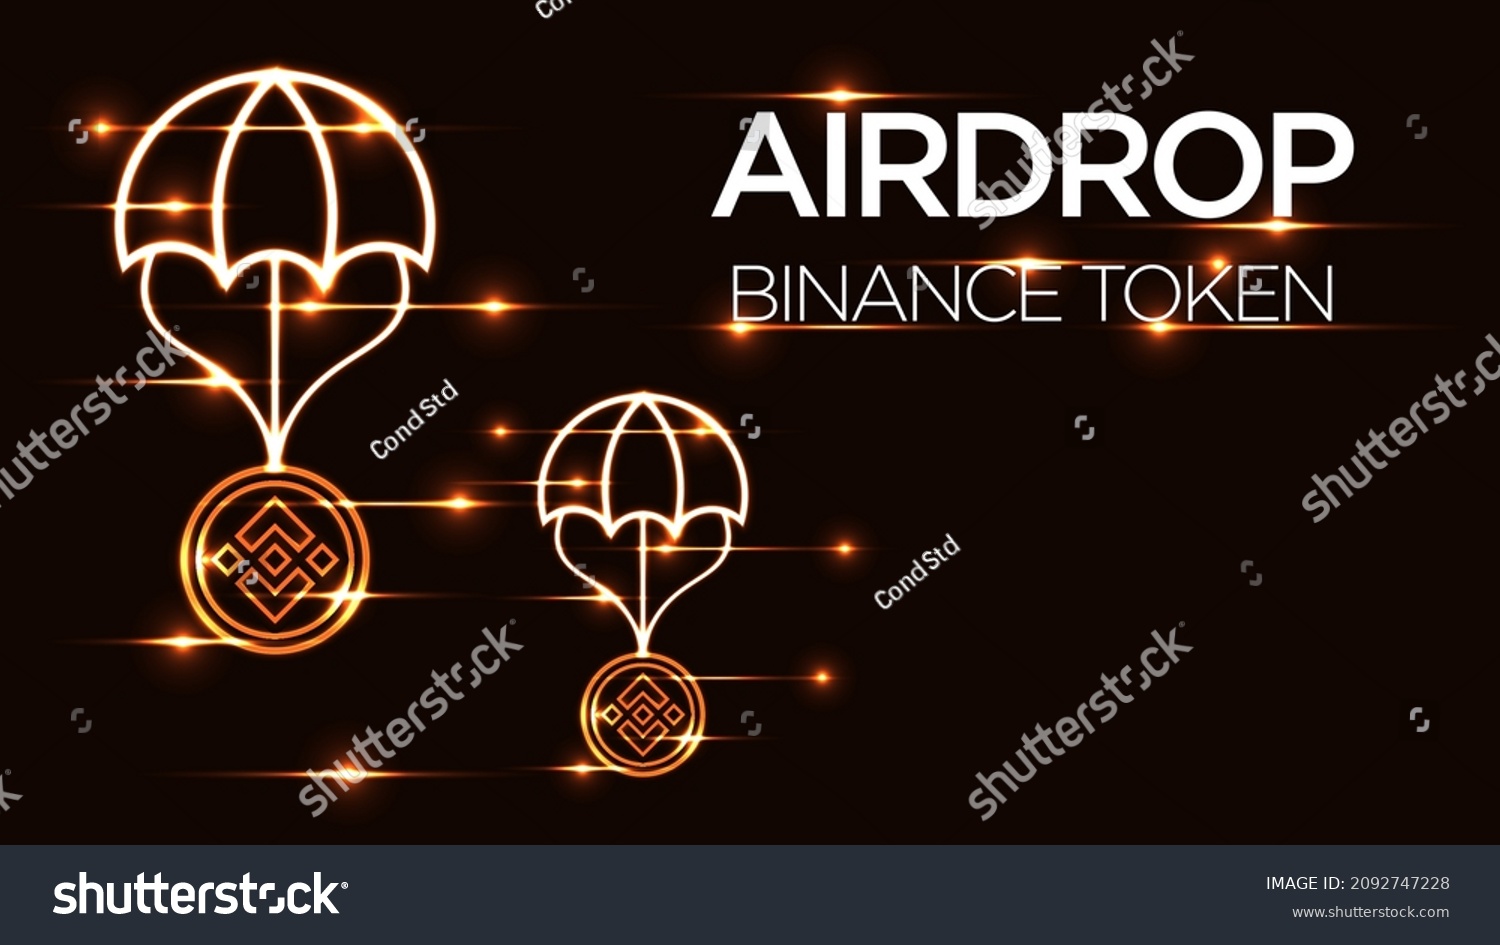 SVG of Binance crypto currency airdrop golden background, BNB token with parachute illustration, blockchain prizes. svg